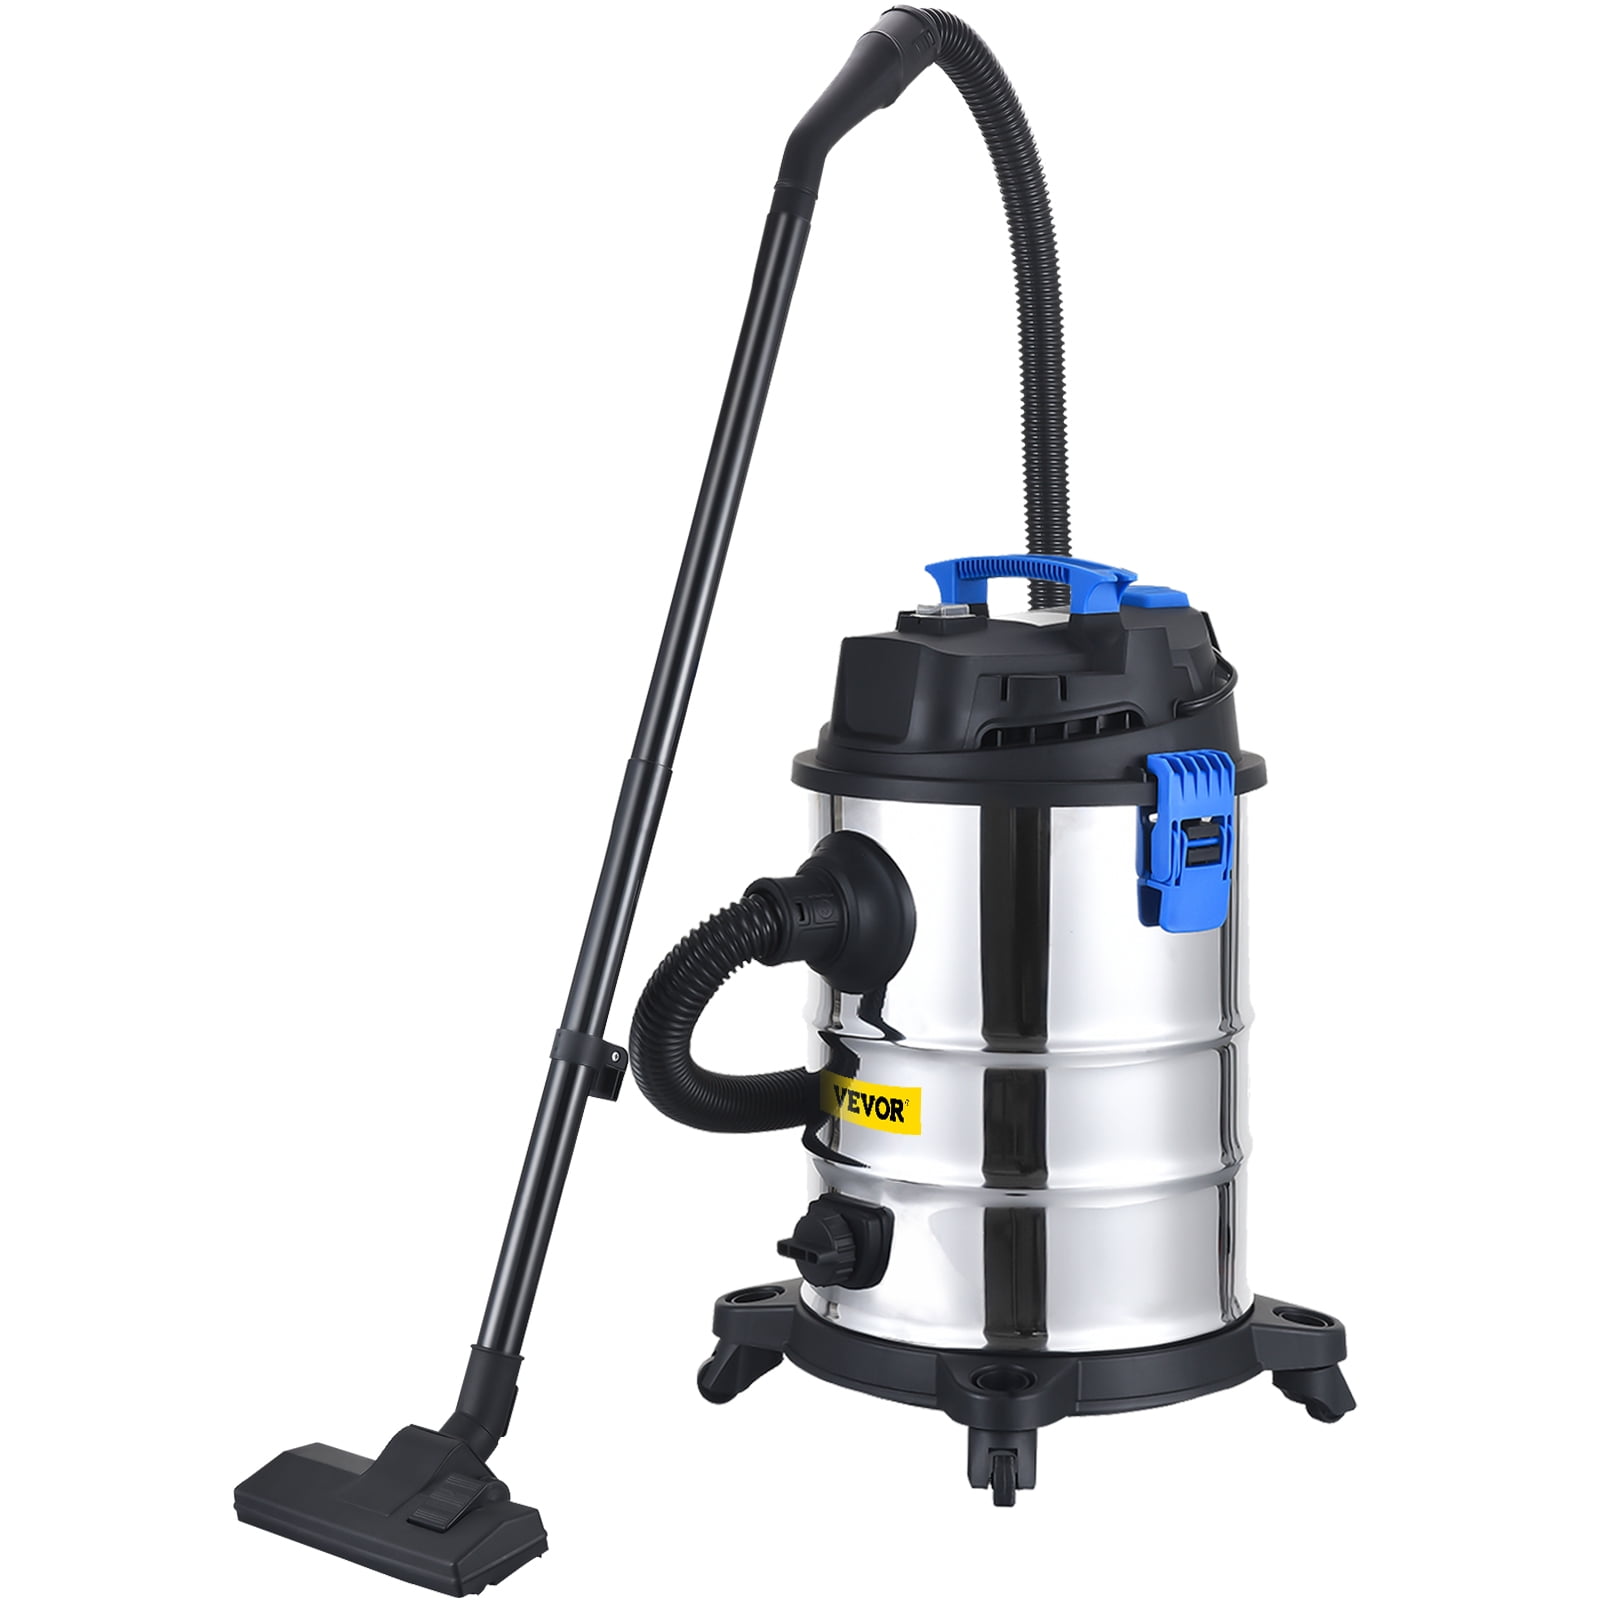 Save SR 180 Hommer vacuum cleaner wet and dry 18 liters 1400 watts